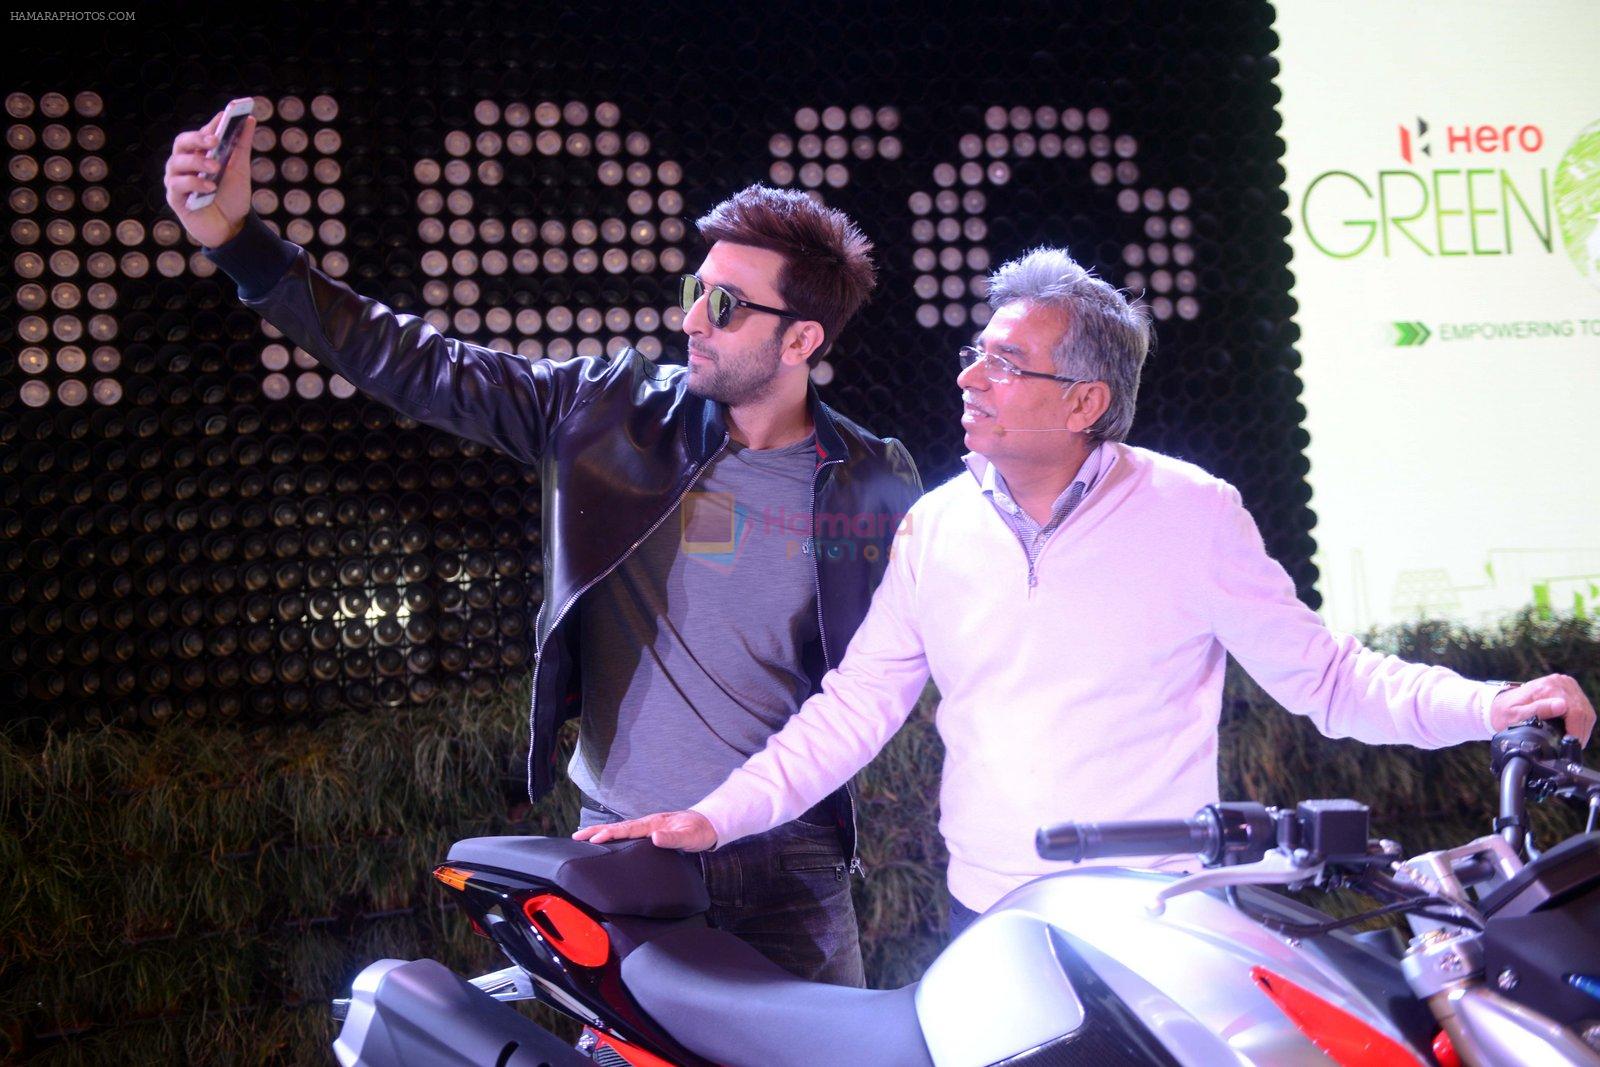 Ranbir Kapoor at the HERO lounge at Auto Expo 2016 in Delhi on 3rd Feb 2016